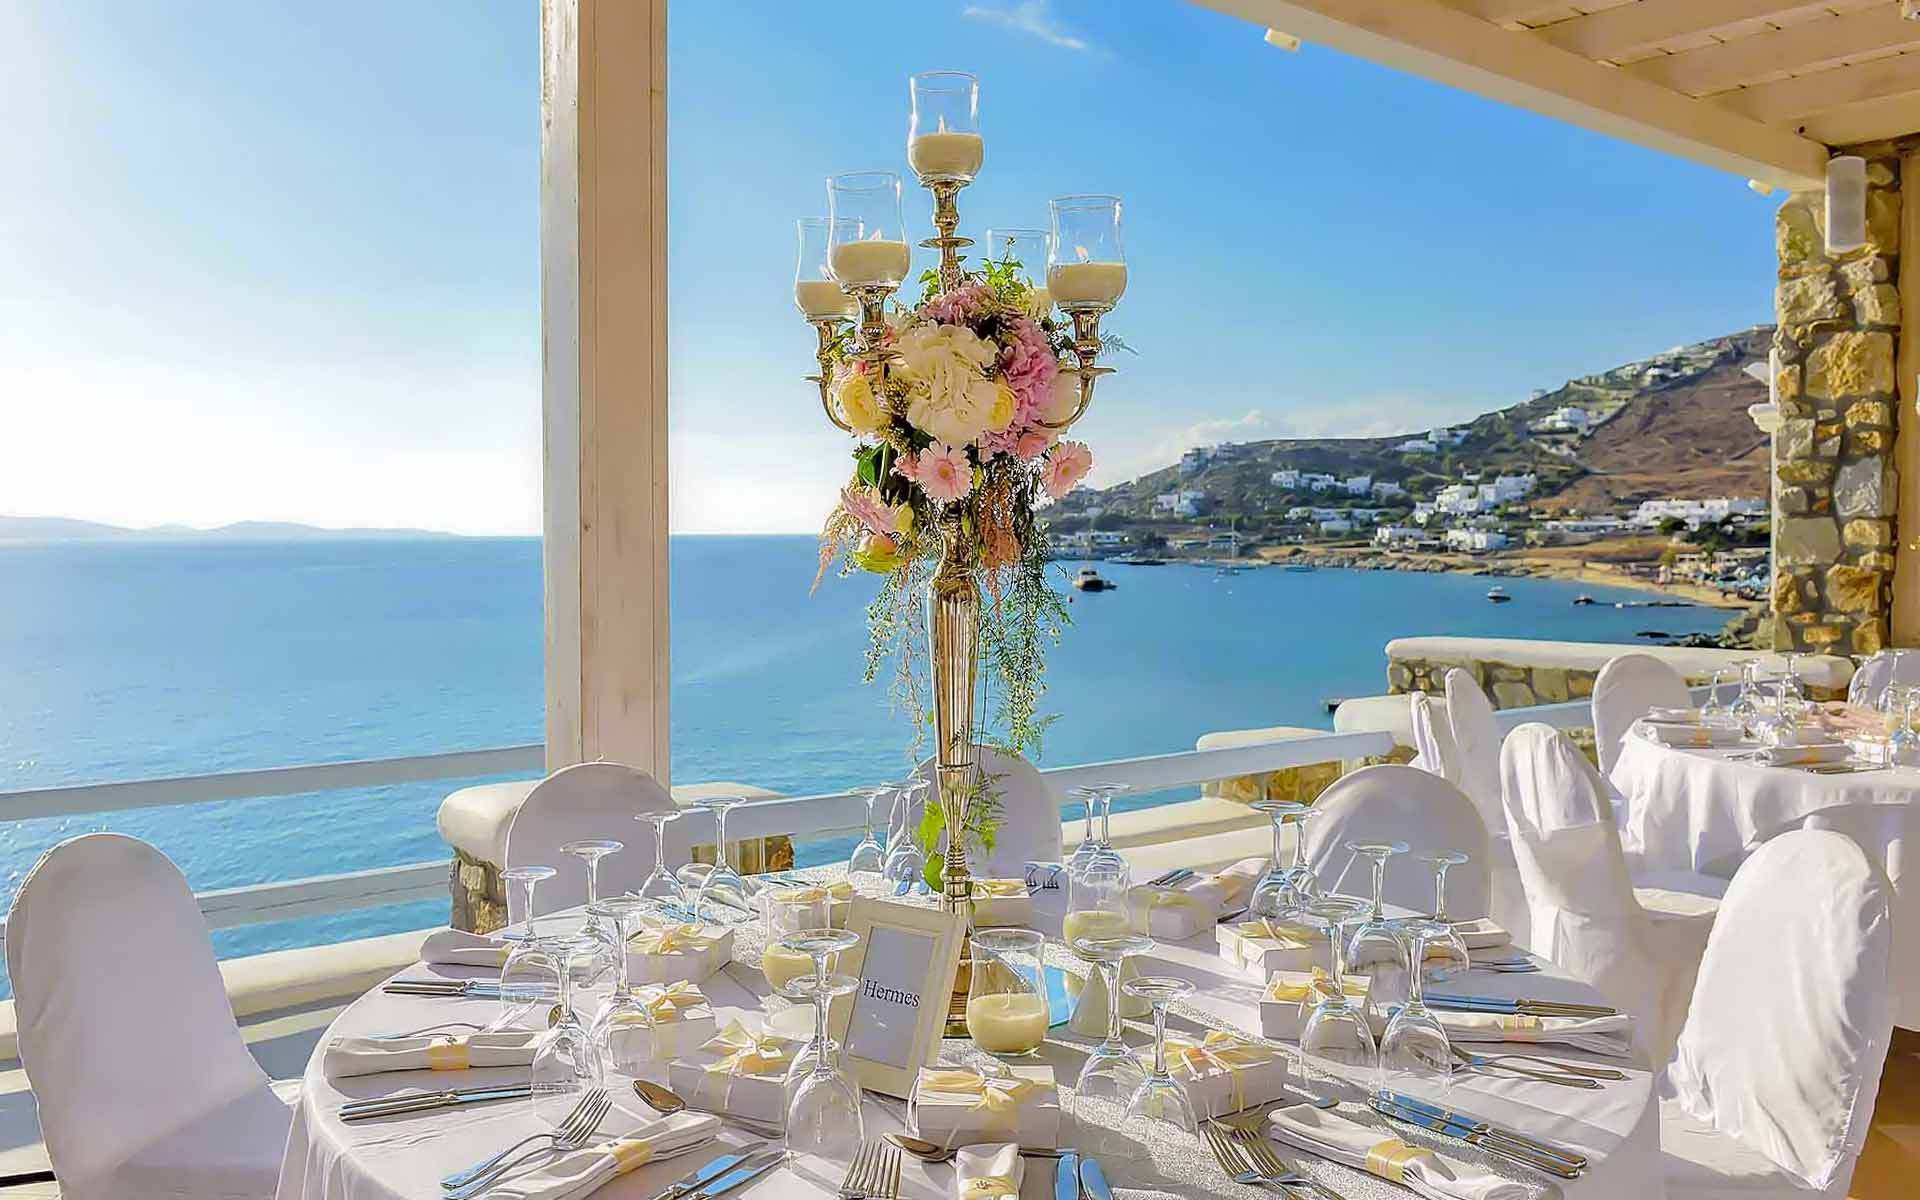 Candelabra As A Centerpiece With The Sea Of Mykonos As A Background by Rogdaki Events Trademark wedding & Events